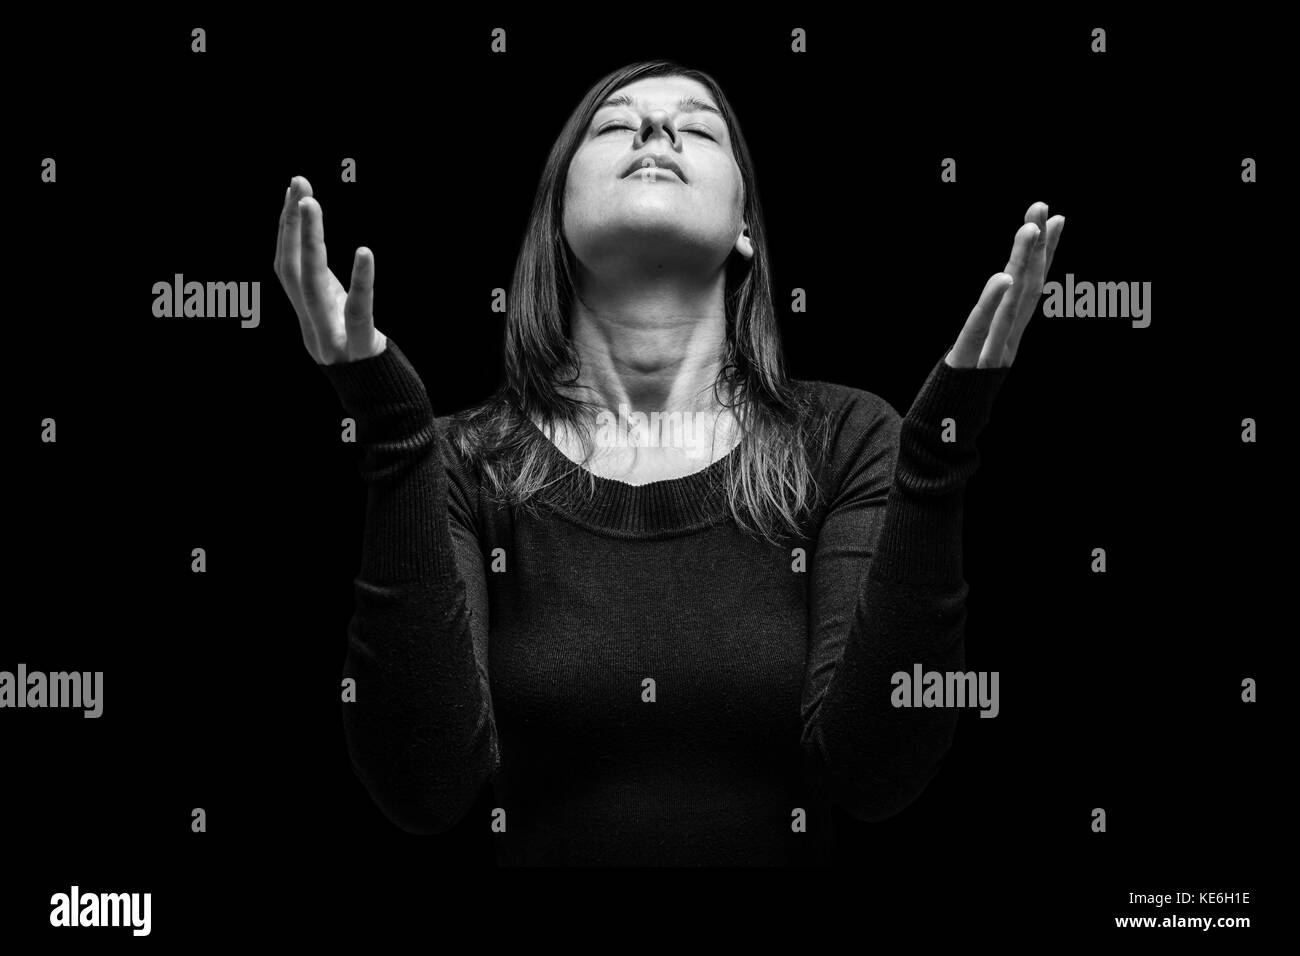 Mourning woman praying with arms outstretched in worship to god. Looking up, eyes closed in suffering. Black background / faith sad grief mourning Stock Photo